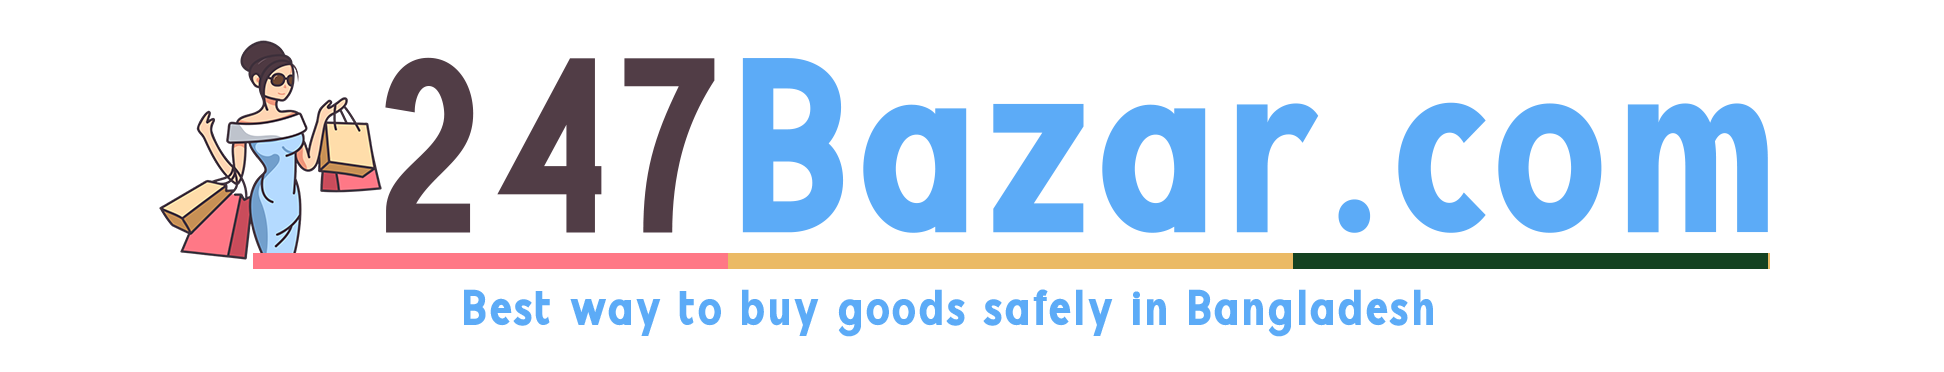 247Bazar – Best and Trusted Online Shopping platform in Bangladesh